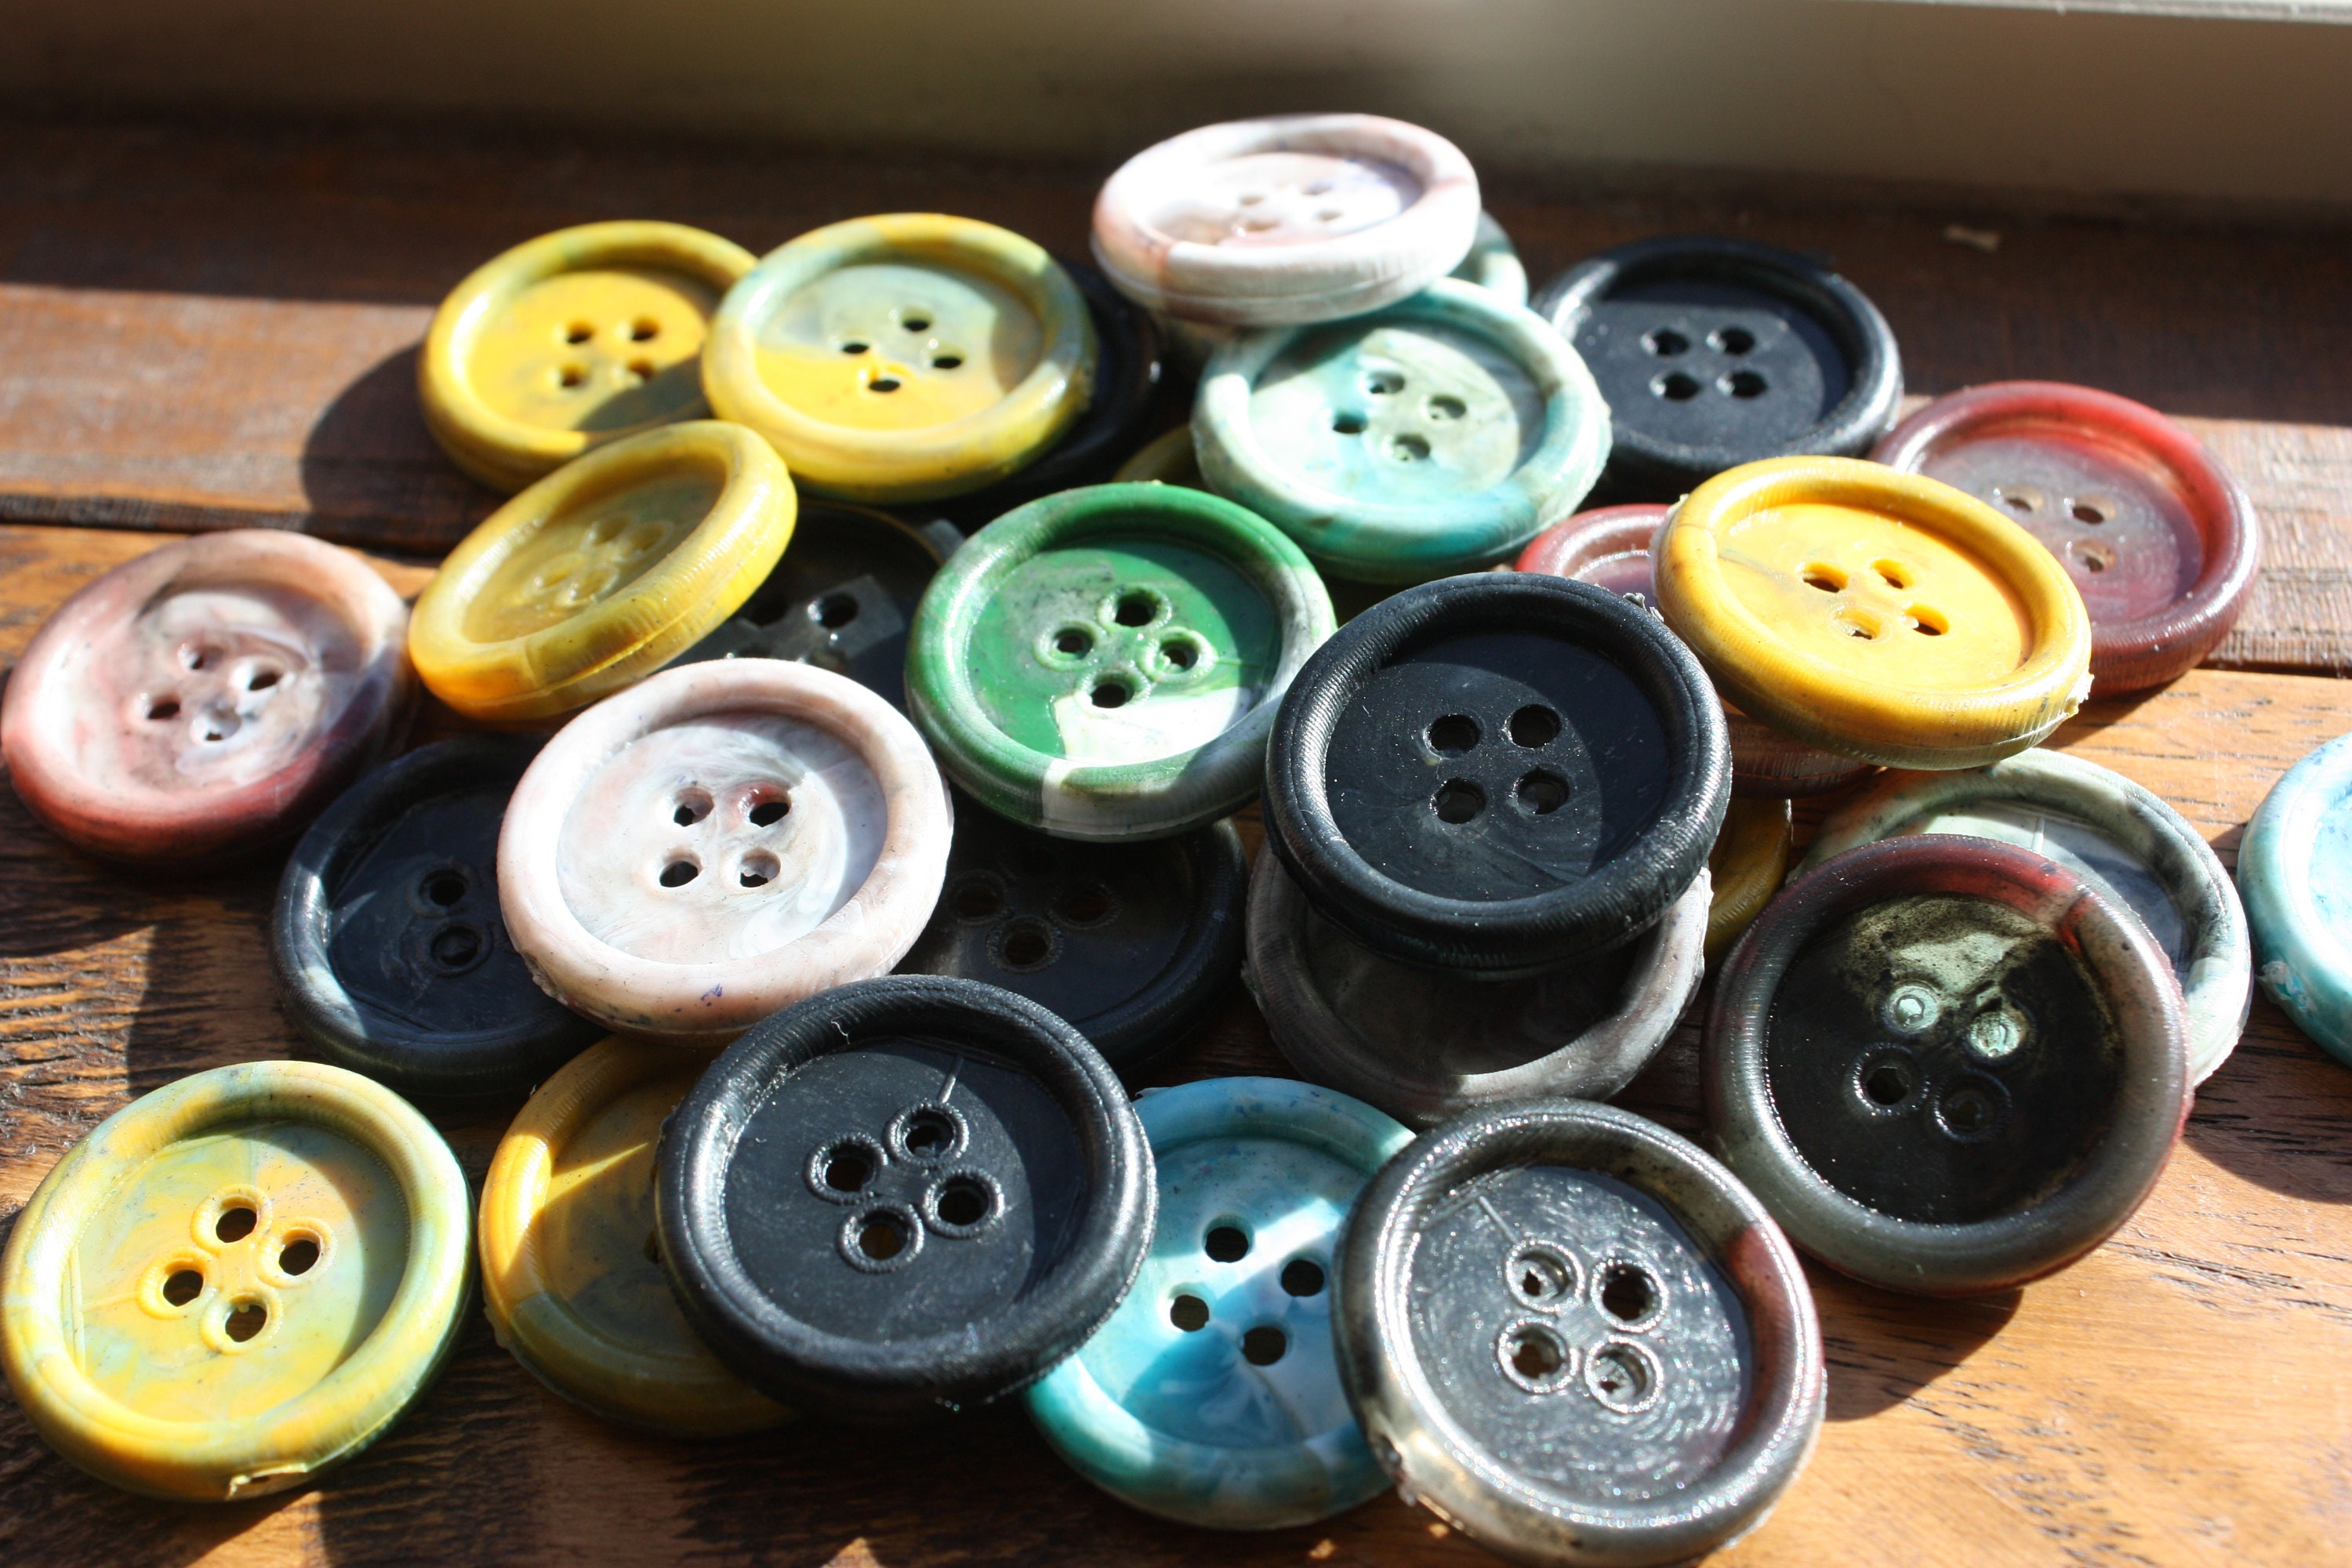 Buttons. Large Round and Multi-sided Buttons. Unique Hand Made